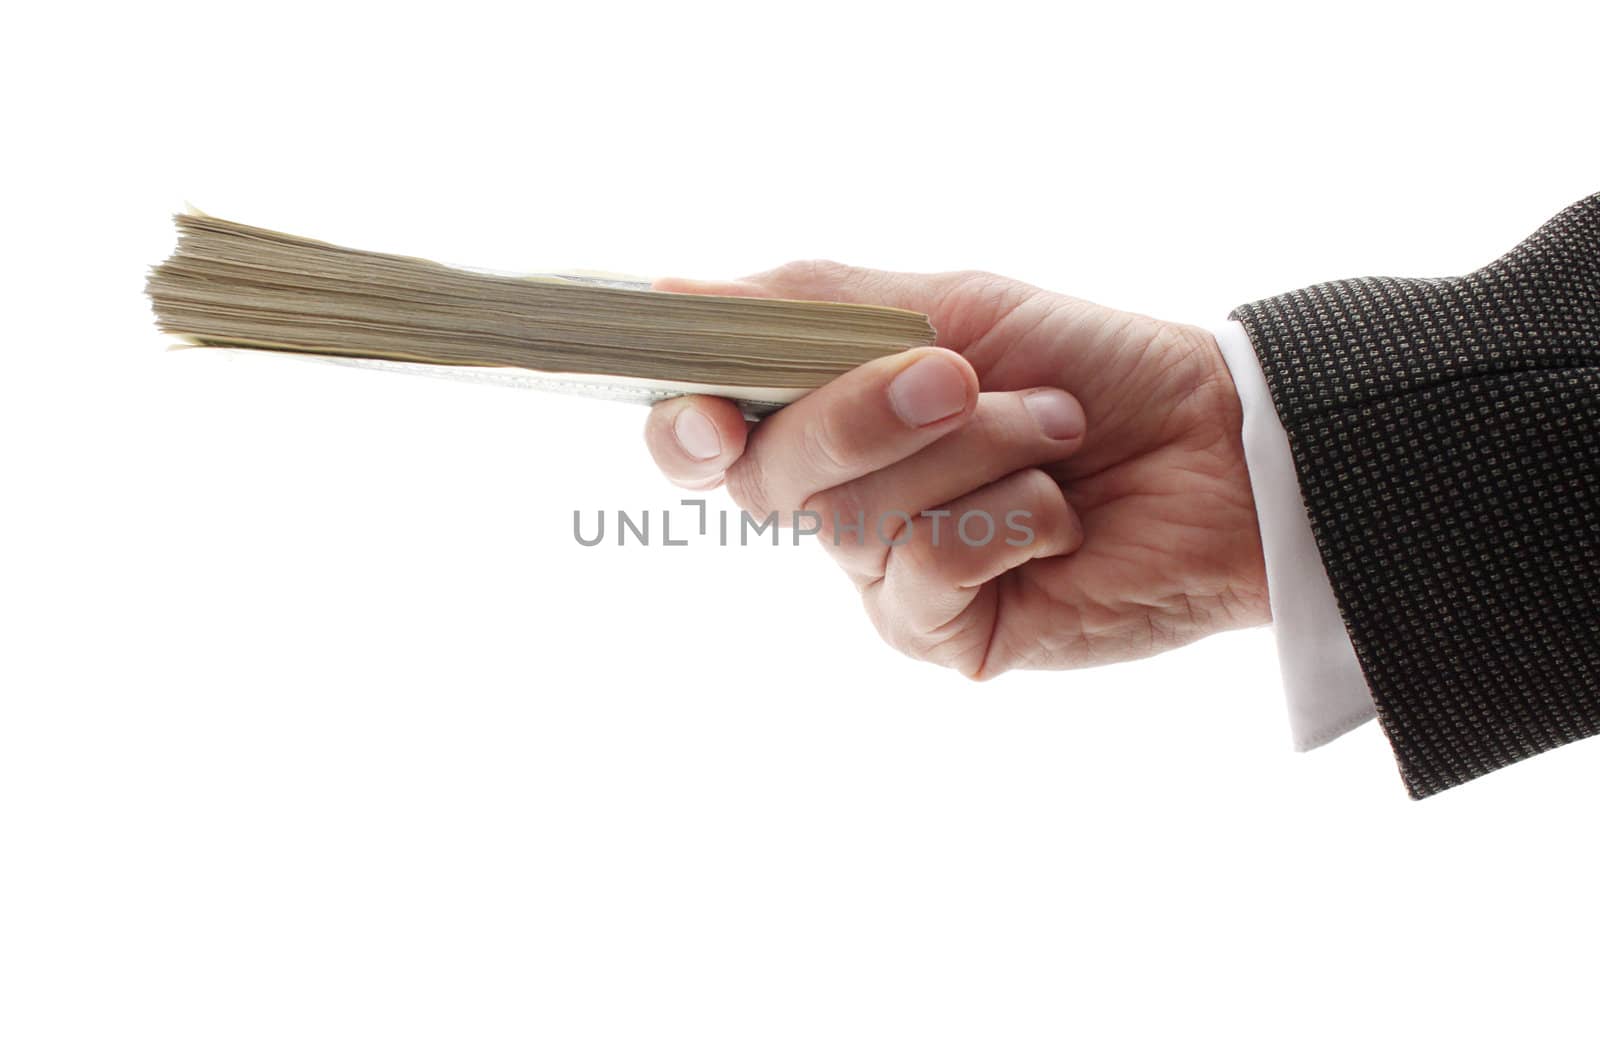 hand of businessman holding pile of dollars